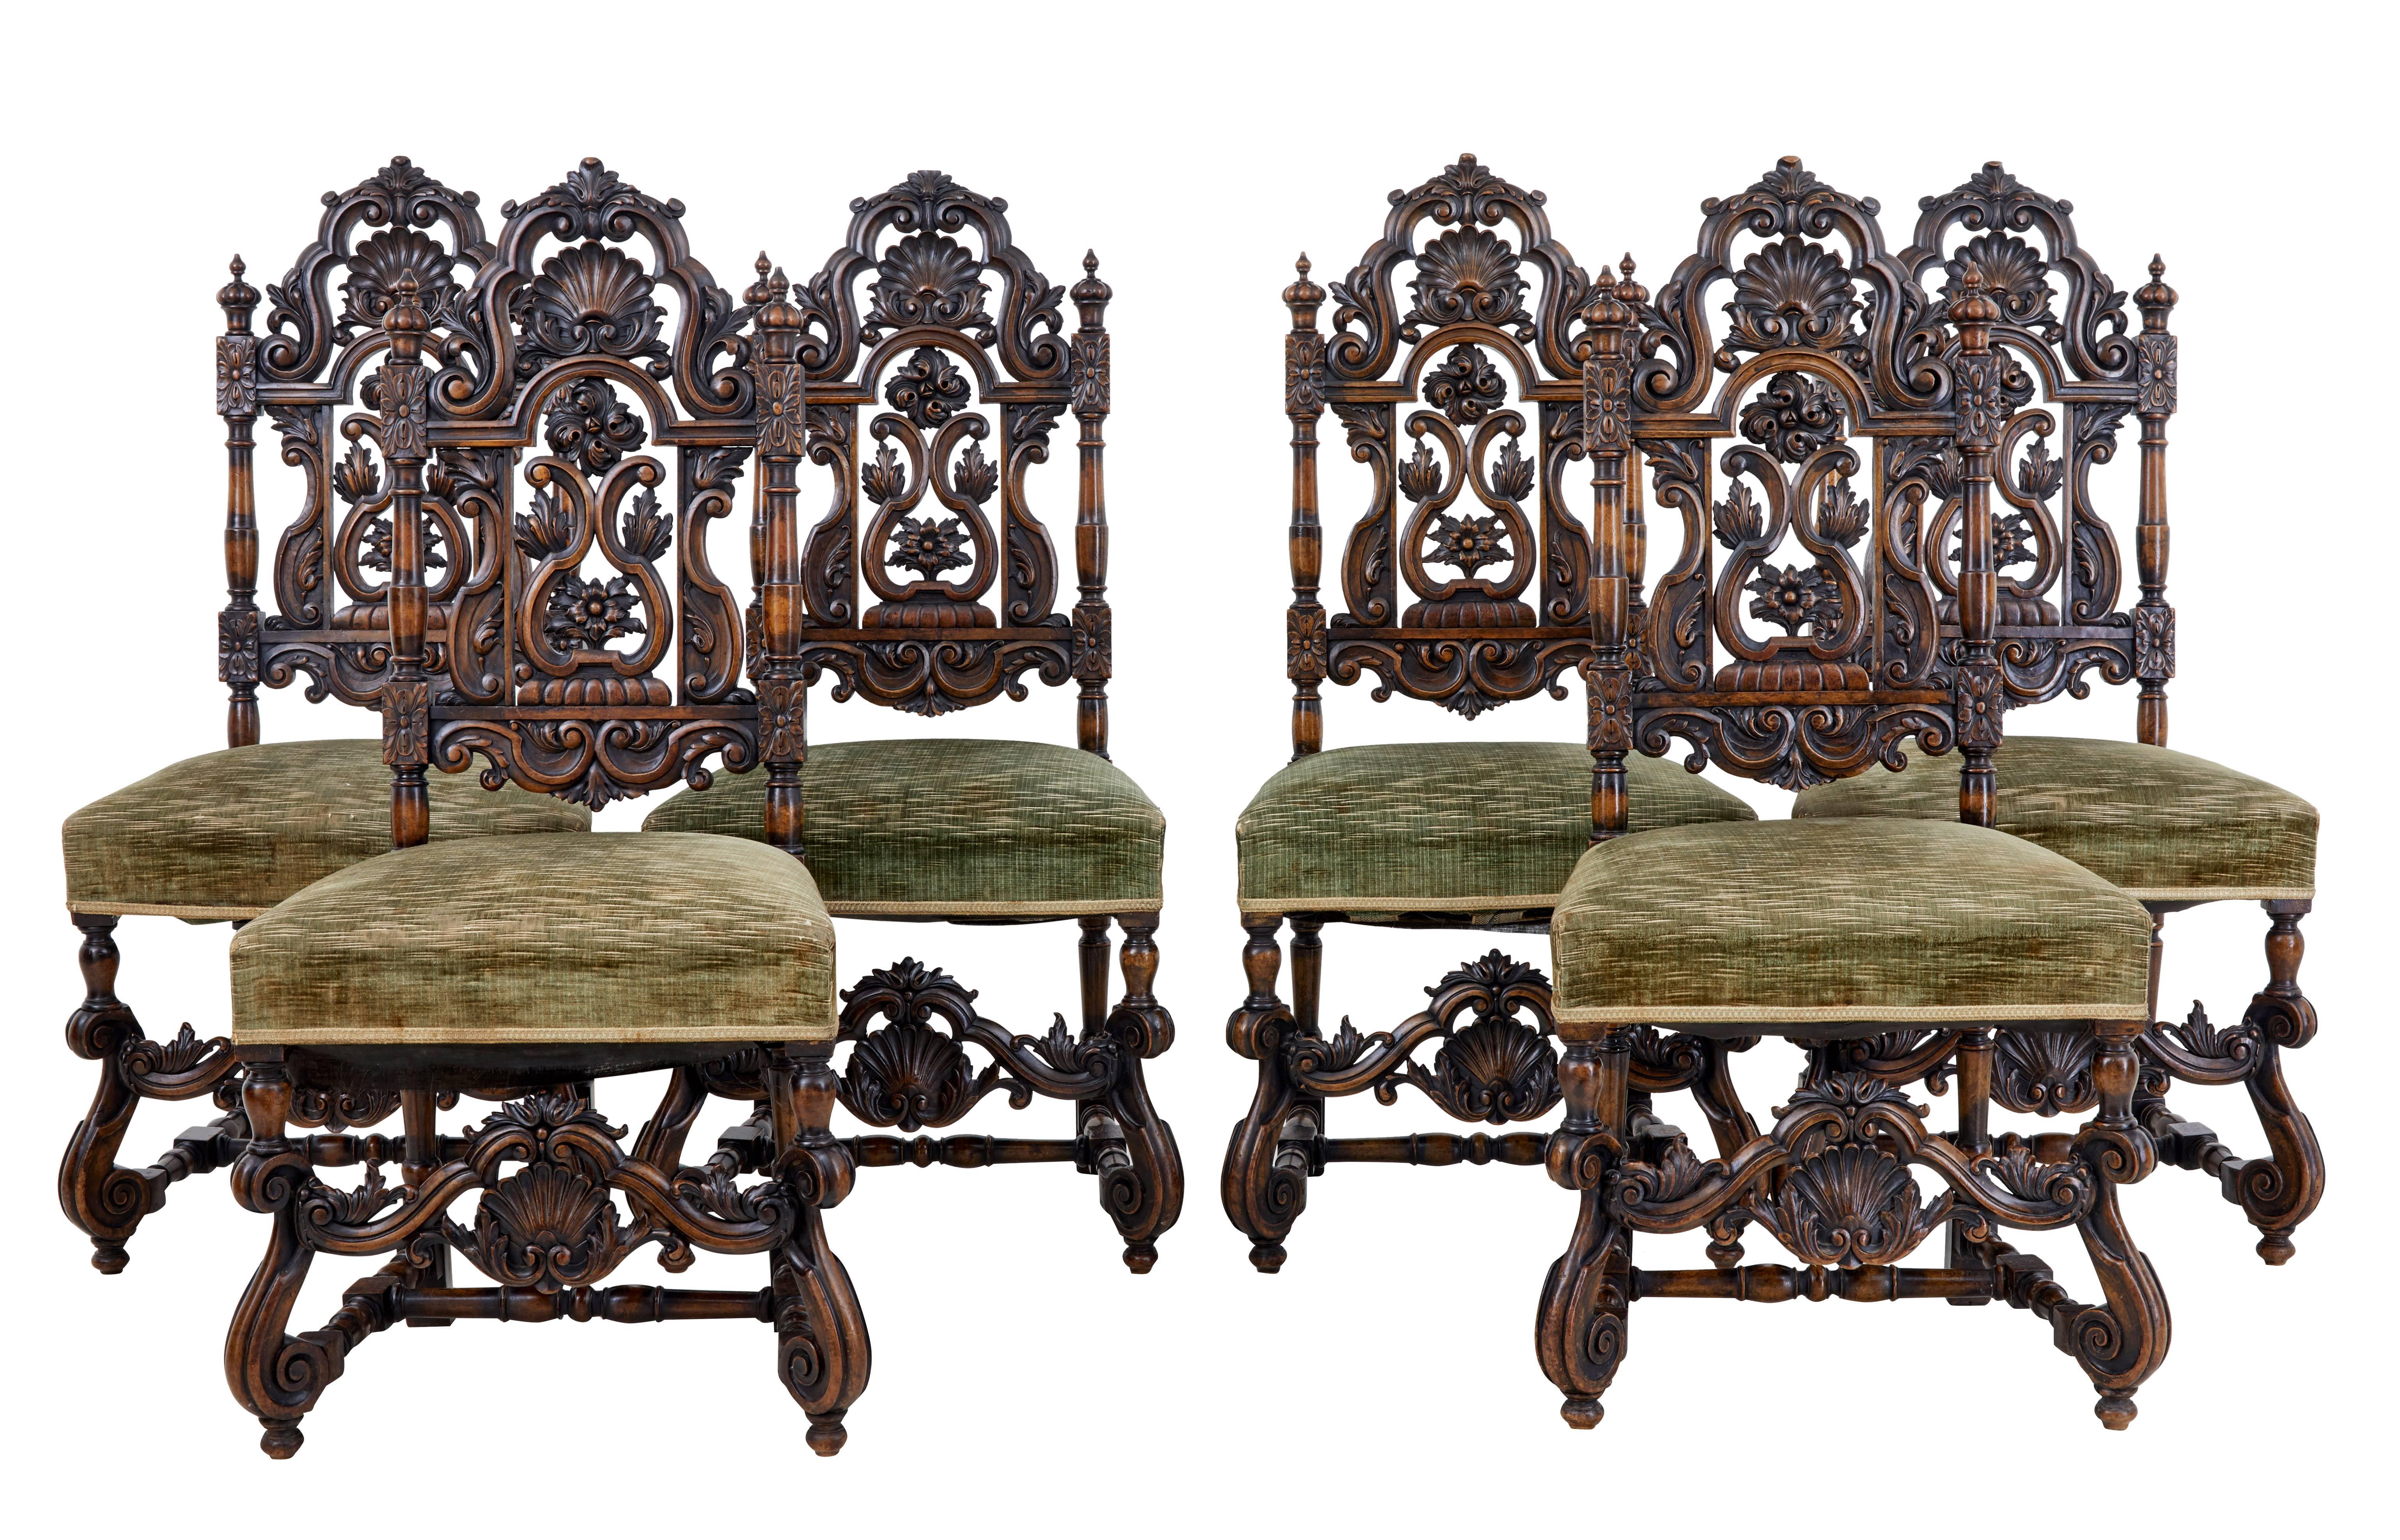 Set comprises of six single and two carver armchairs. Rare to find a set of this quality anymore of good rich color and patina.

Beautifully open carved backs depicting scrolls, foliage, shells and florals. Turned supports run from the top down to